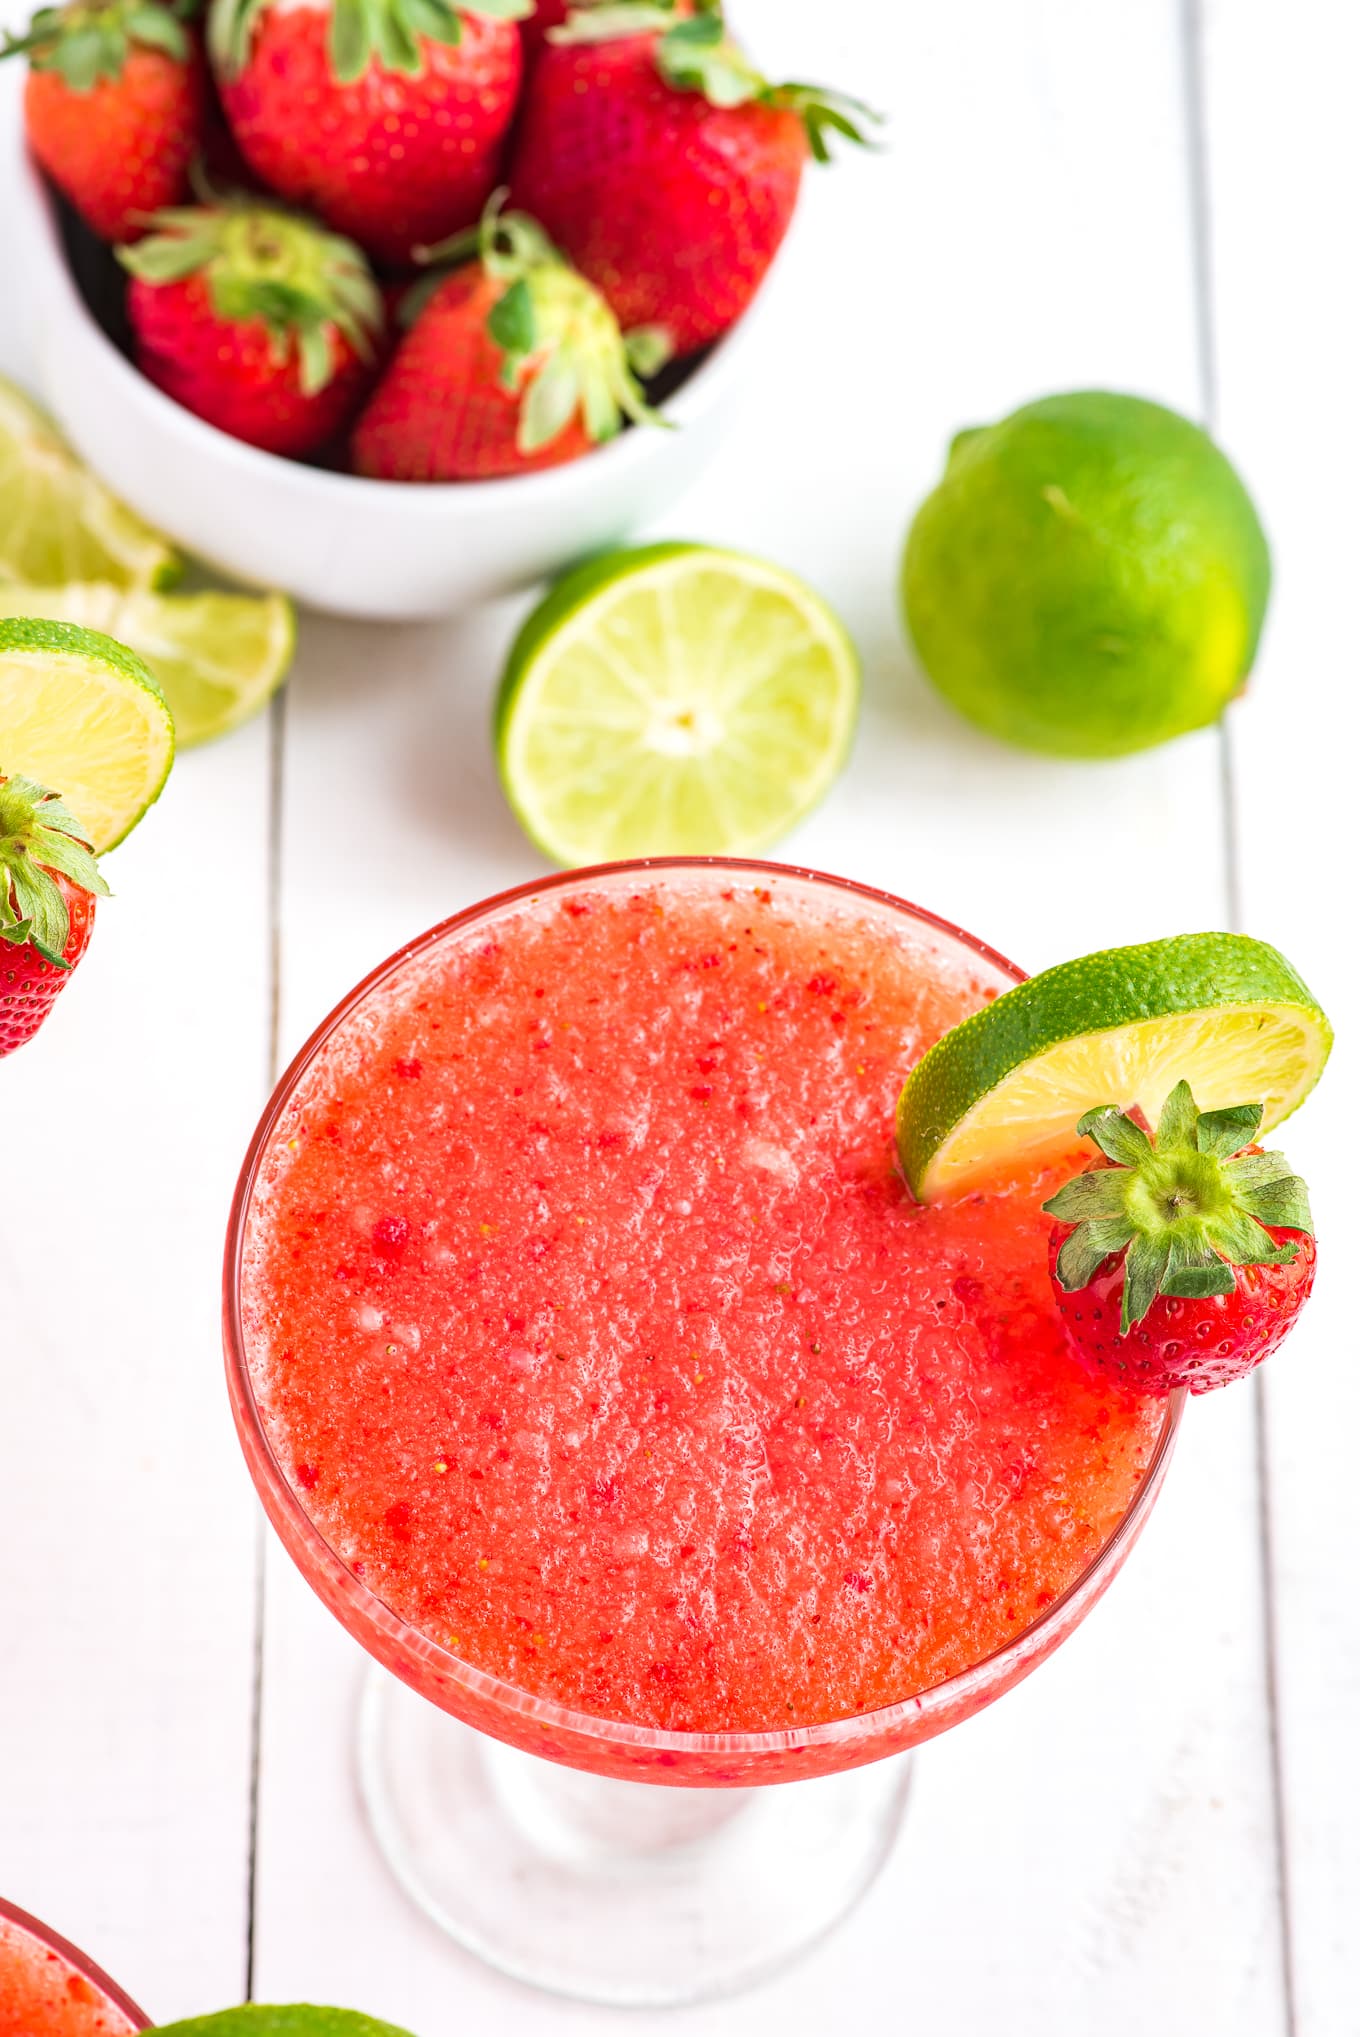 Overhead view of frozen strawberry margarita in a glass with limes and strawberries on the table around it.